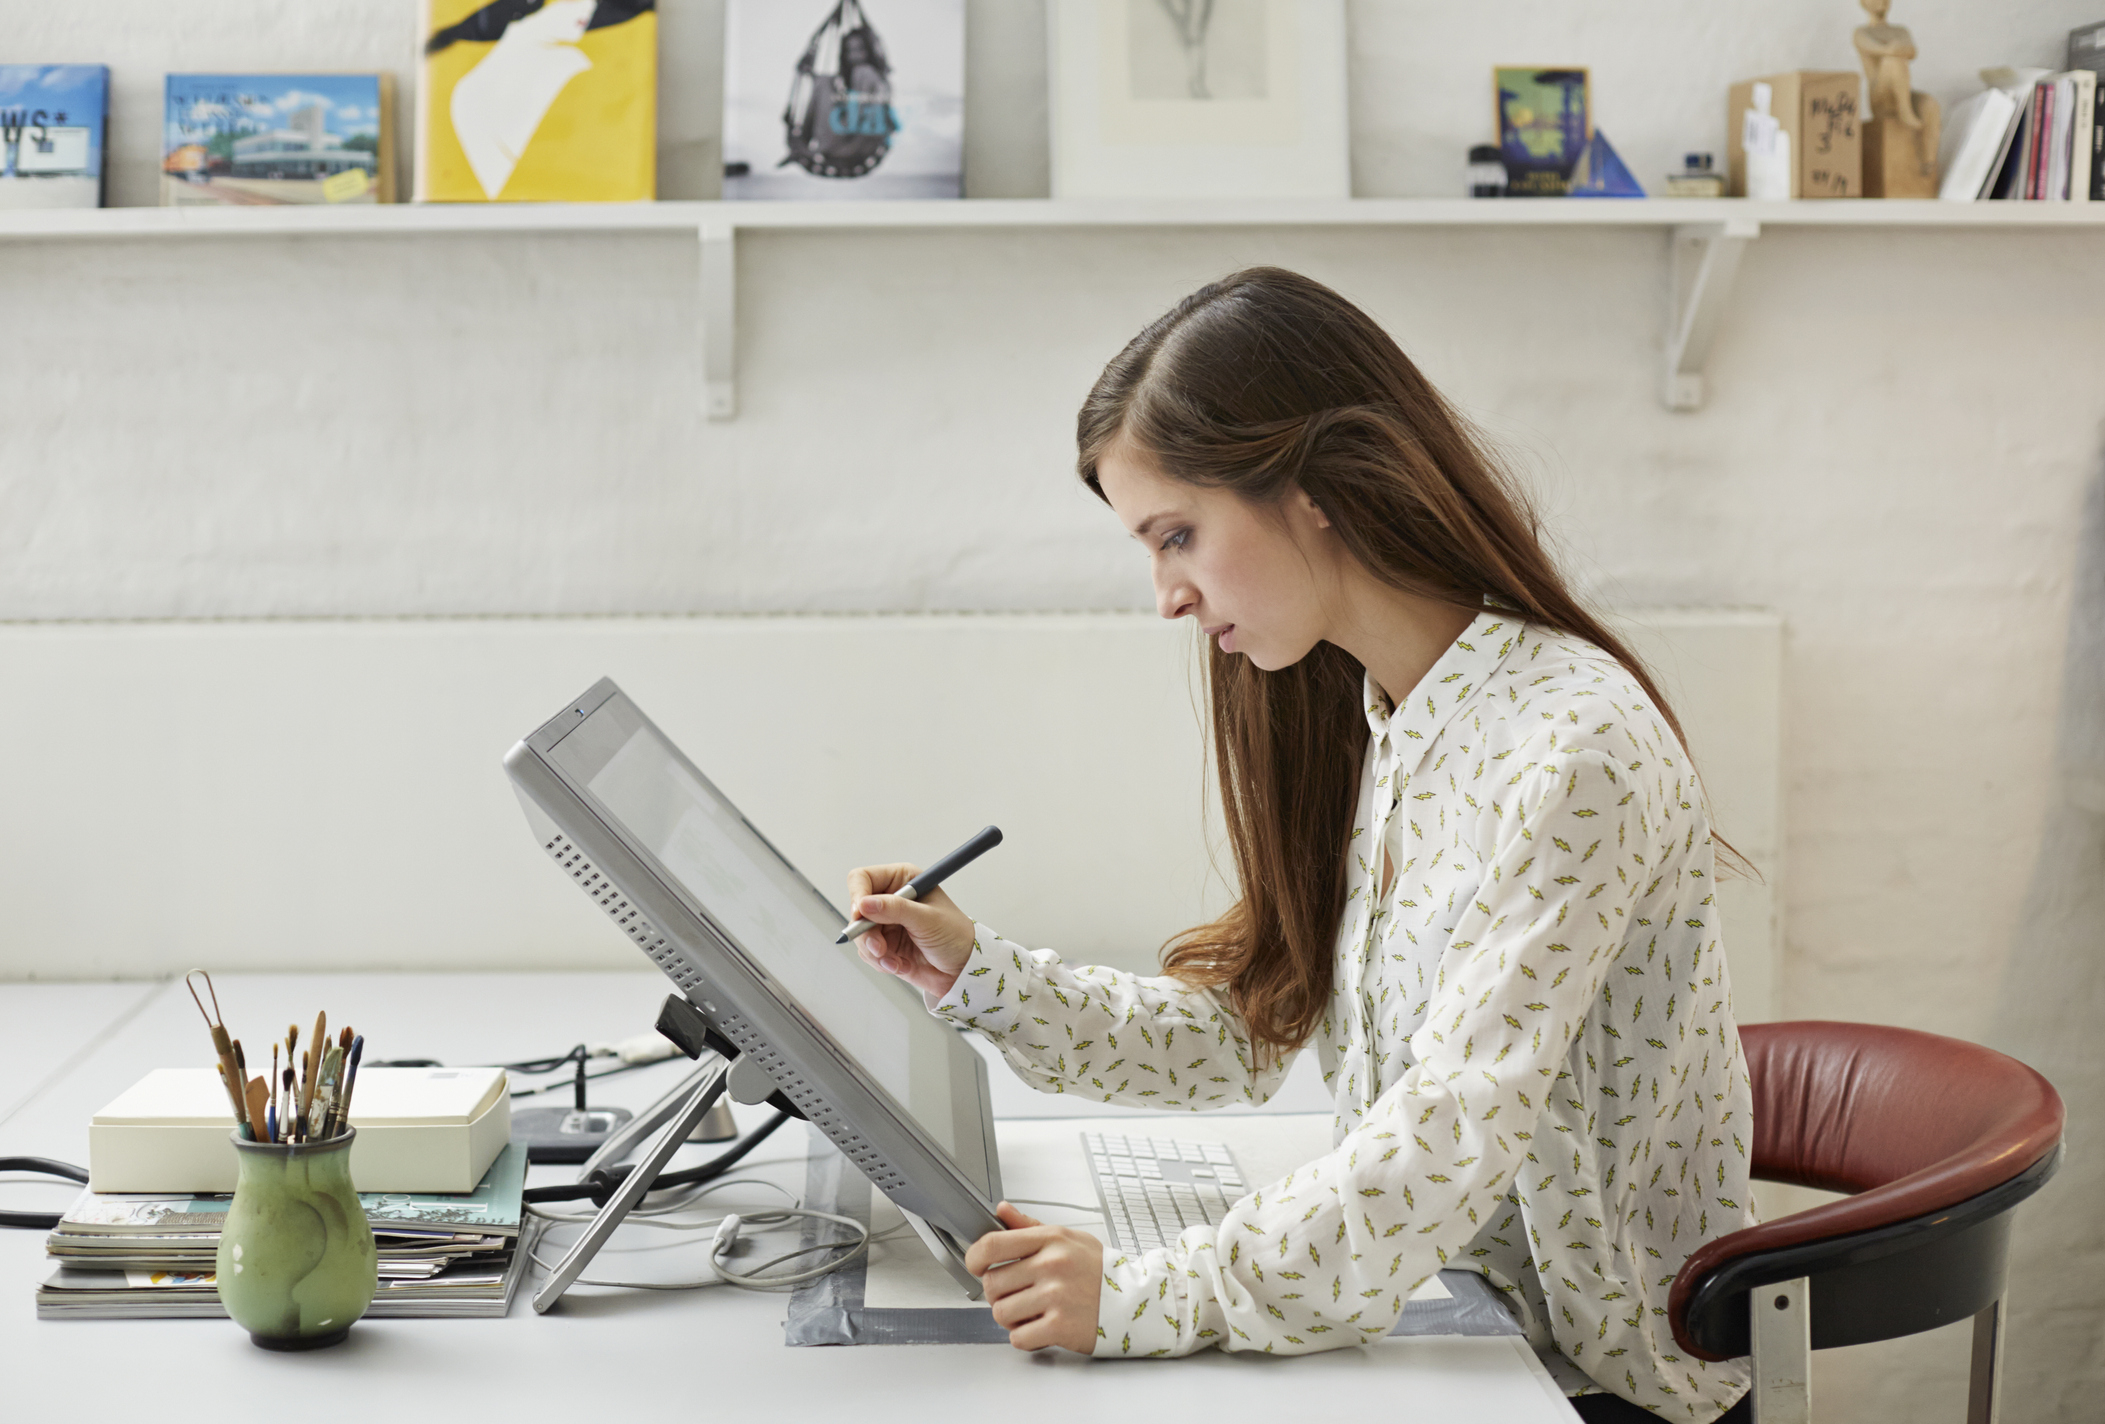 A woman designing on a tablet at her desk